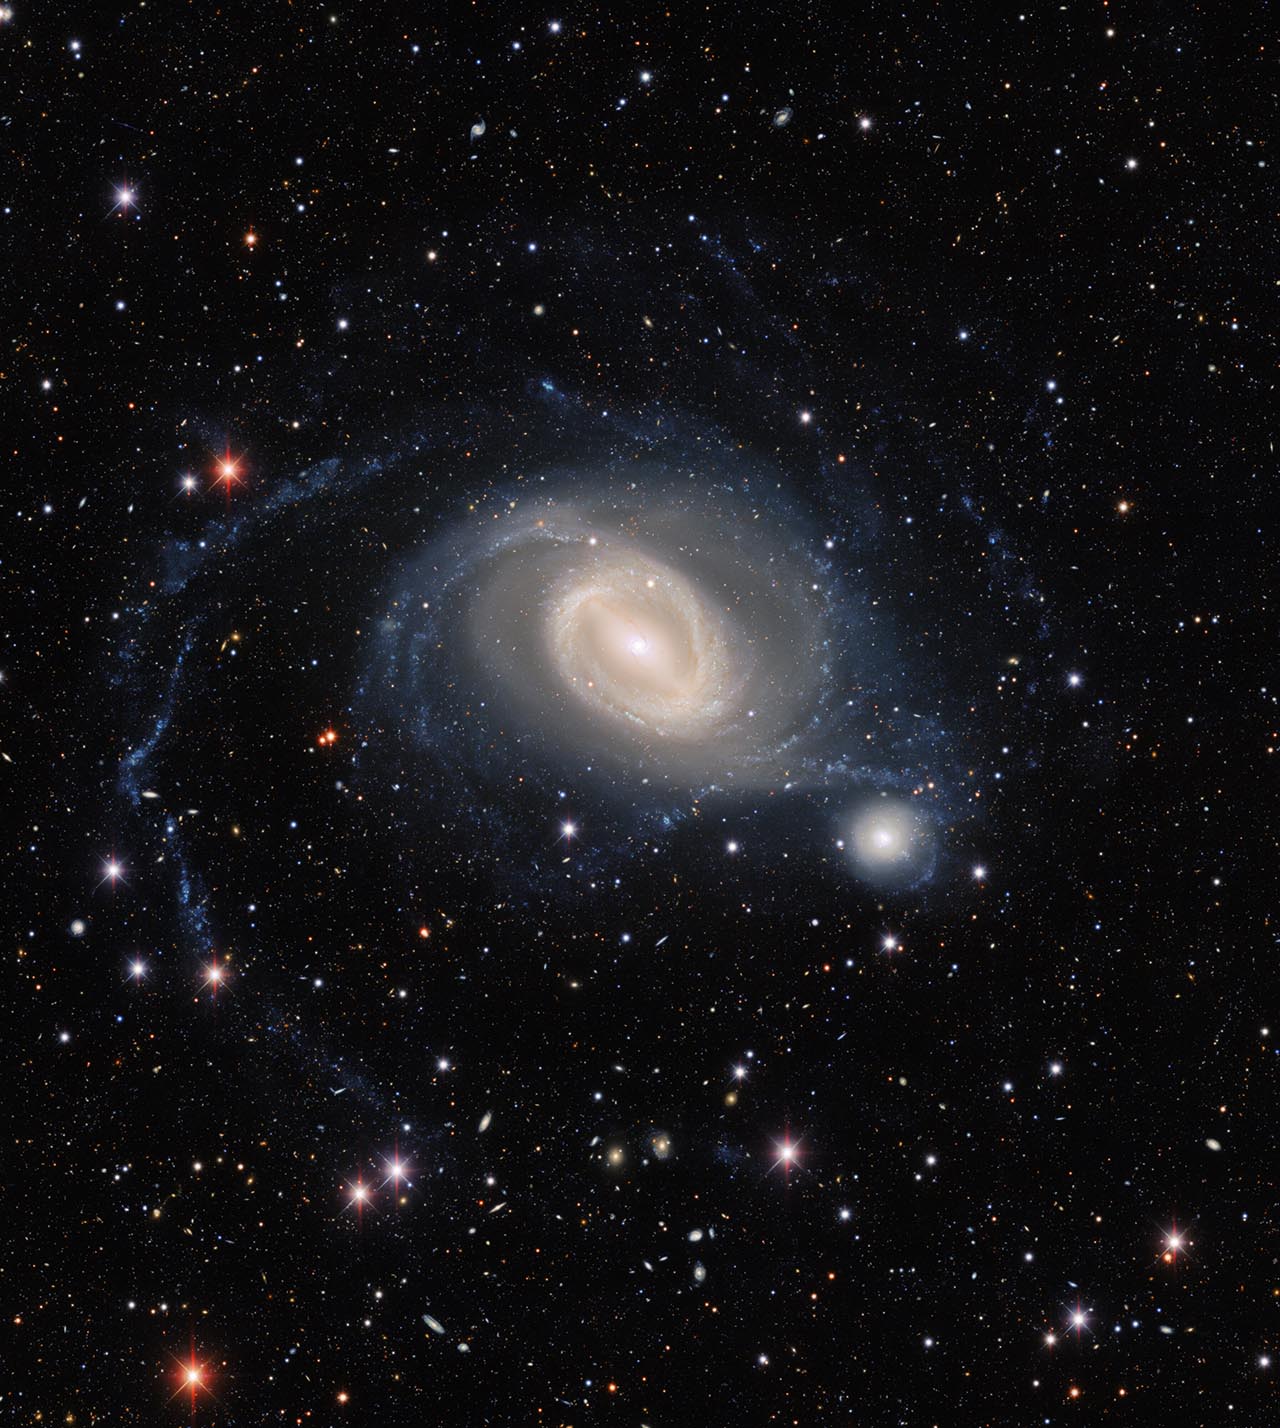 The interacting galaxy pair NGC 1512 and NGC 1510 take center stage in this image from the Dark Energy Camera, a state-of-the art wide-field imager on the Víctor M. Blanco 4-meter Telescope at Cerro Tololo Inter-American Observatory, a Program of NSF’s NOIRLab. NGC 1512 has been in the process of merging with its smaller galactic neighbor for 400 million years, and this drawn-out interaction has ignited waves of star formation and warped both galaxies.